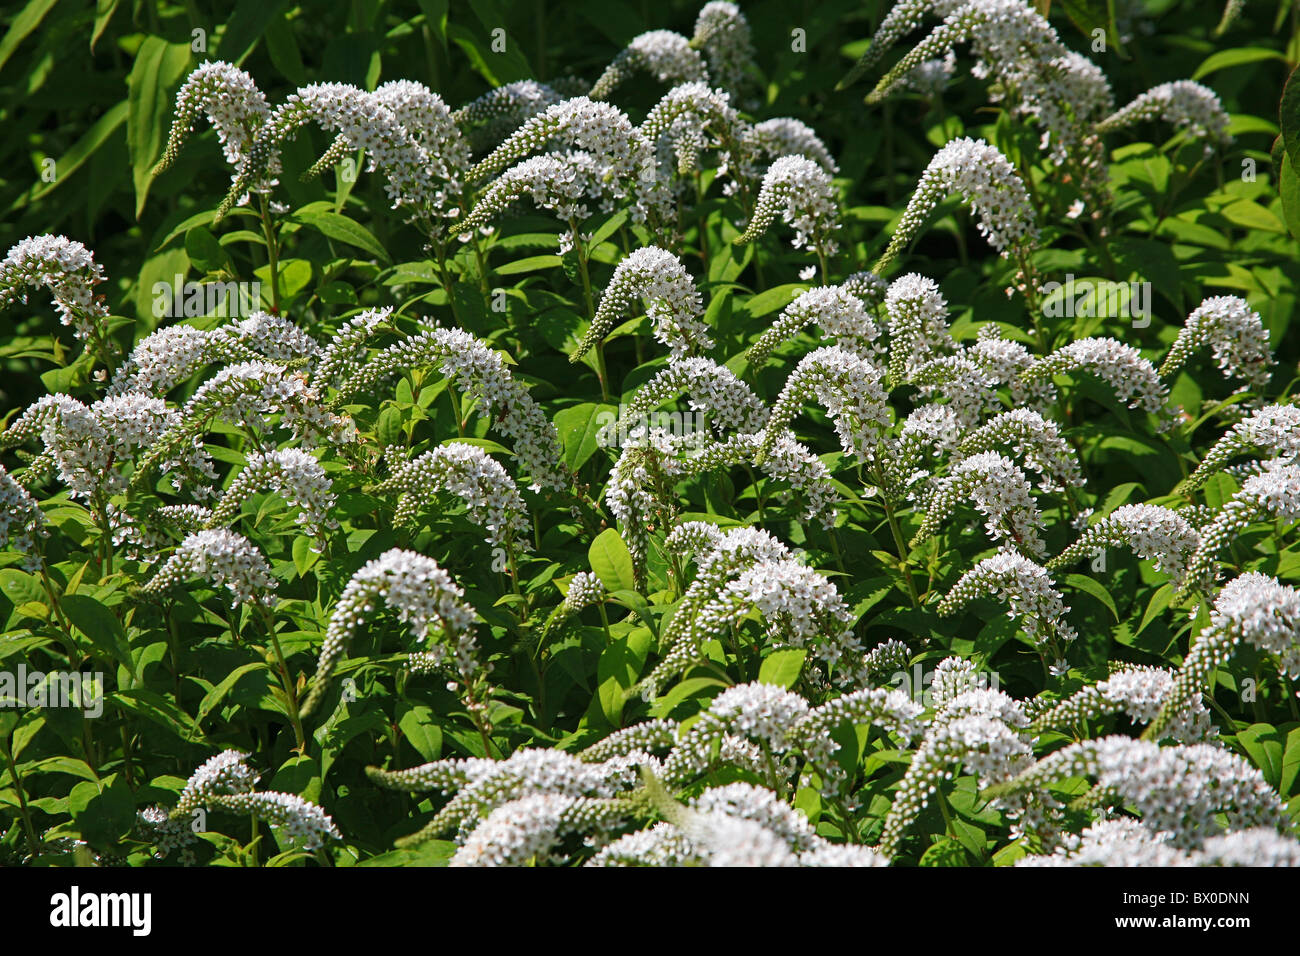 The summer display of Lysimachia clethroides in Knoll Gardens in Wimborne, Dorset, England, UK Stock Photo